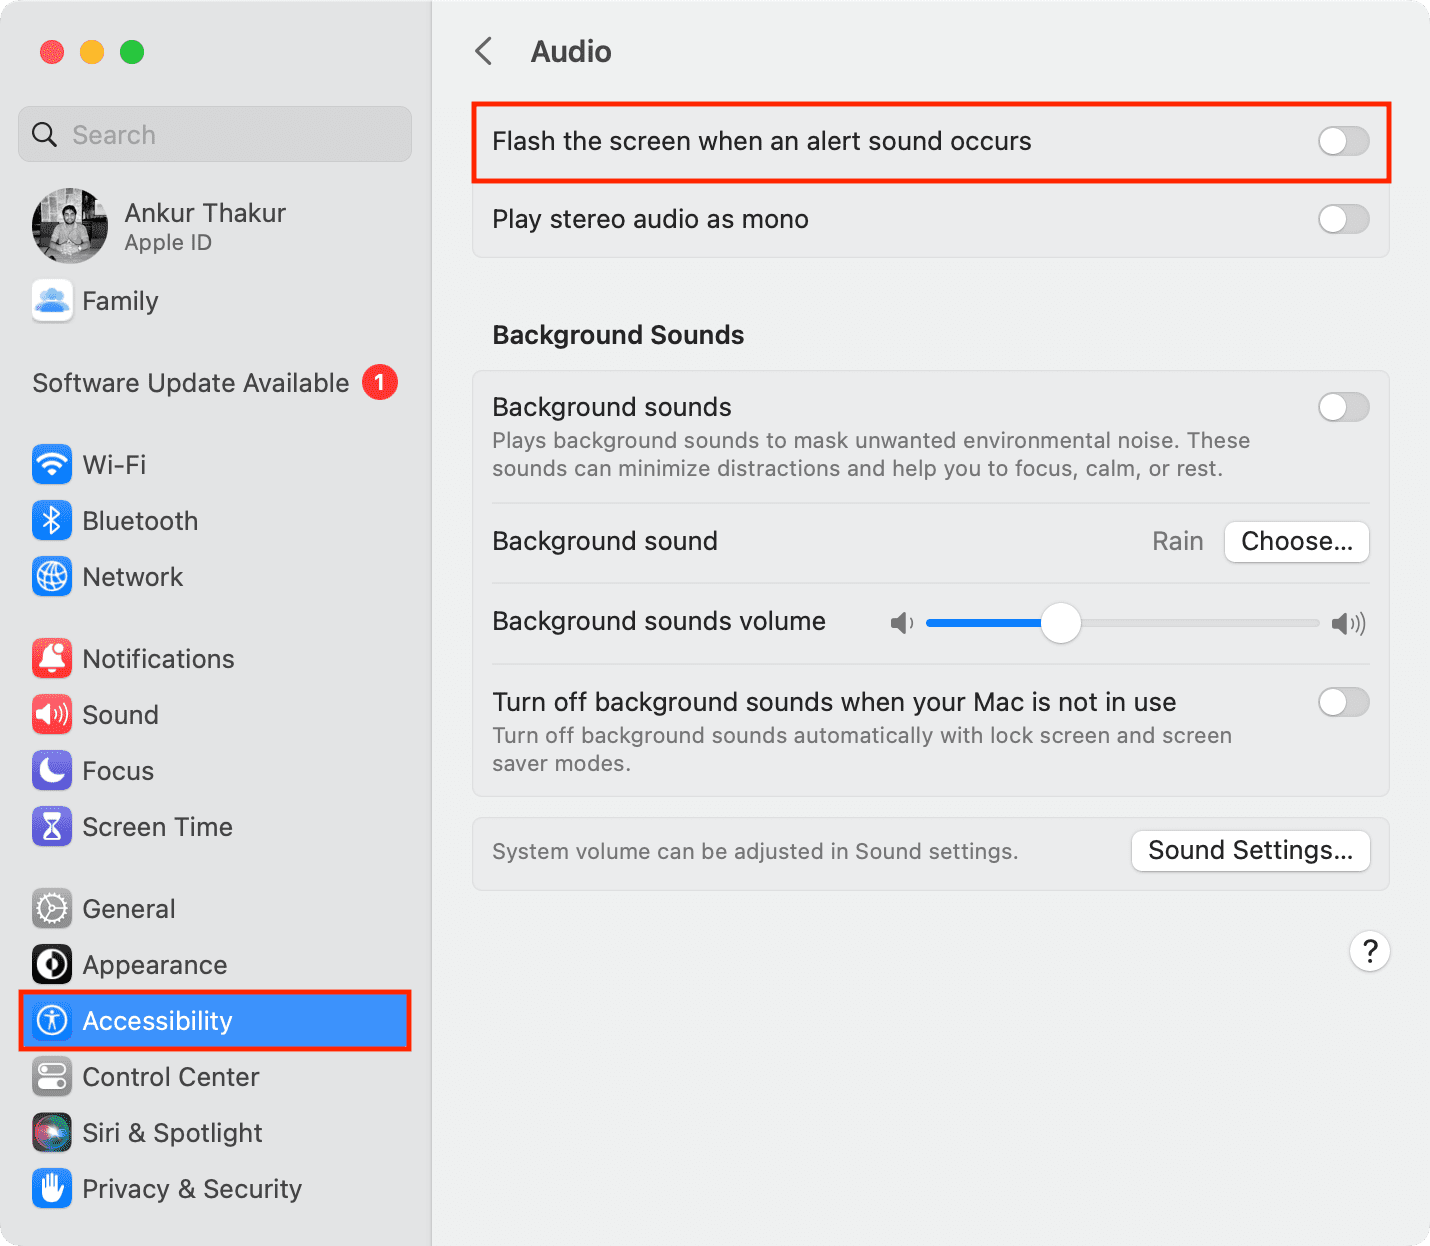 Turn off Flash the screen when an alert sound occurs on Mac